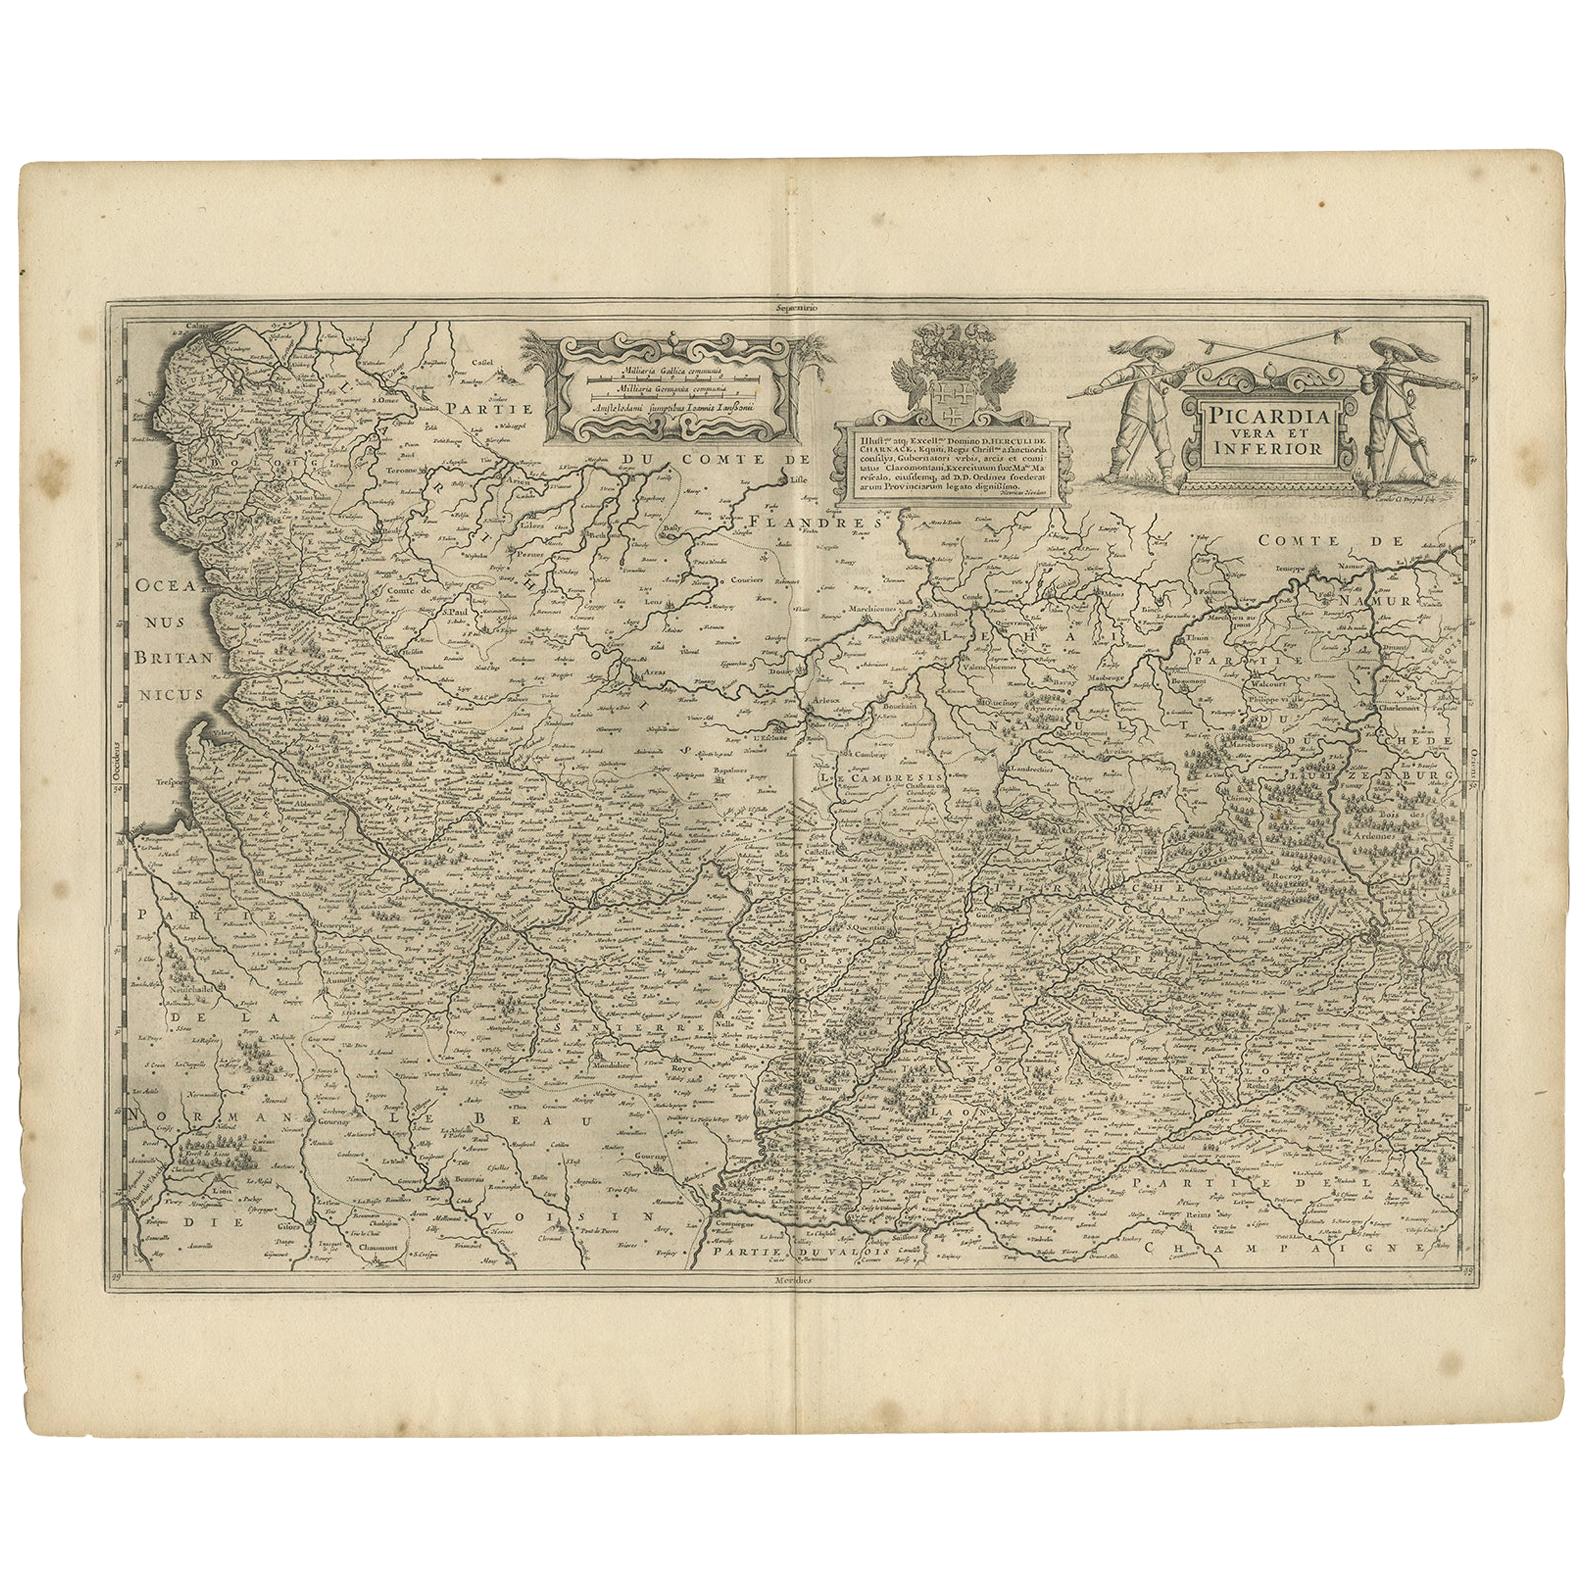 Antique Map of the Region of Picardy by Janssonius, 1657